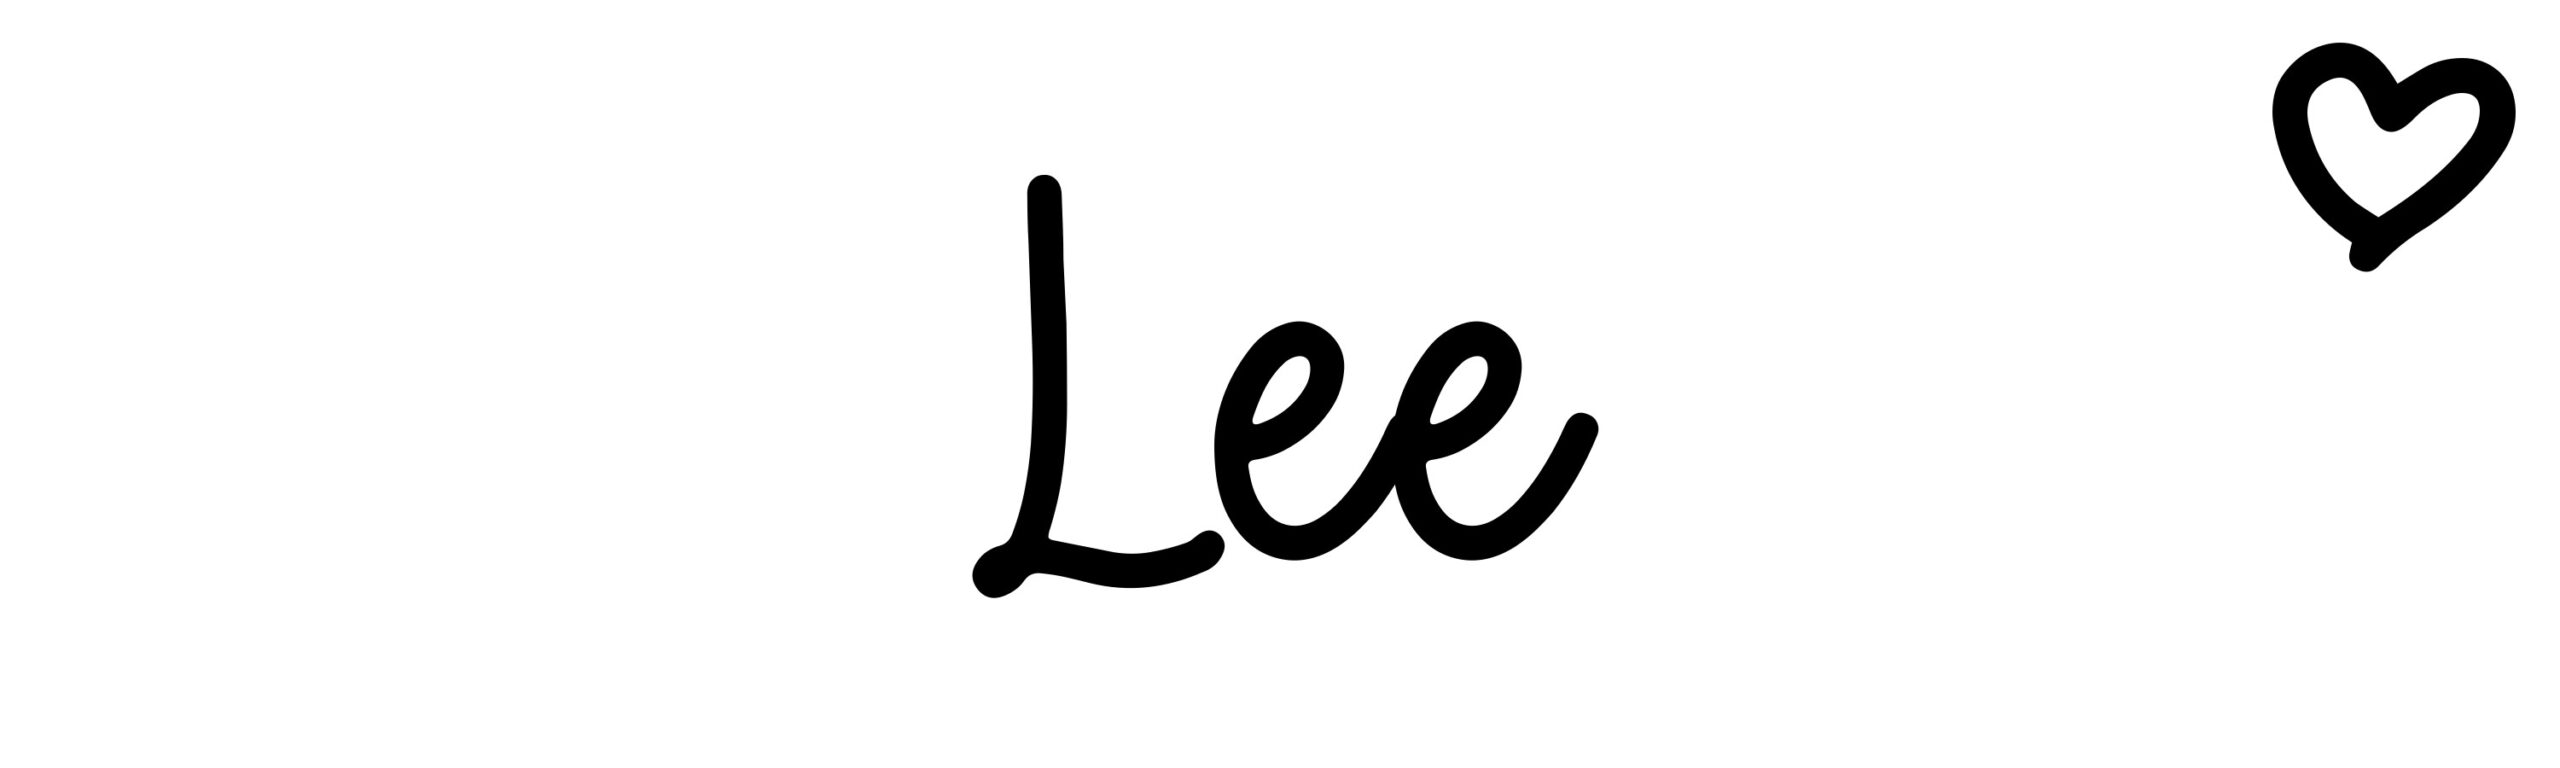 Lee - Name meaning, origin, variations and more